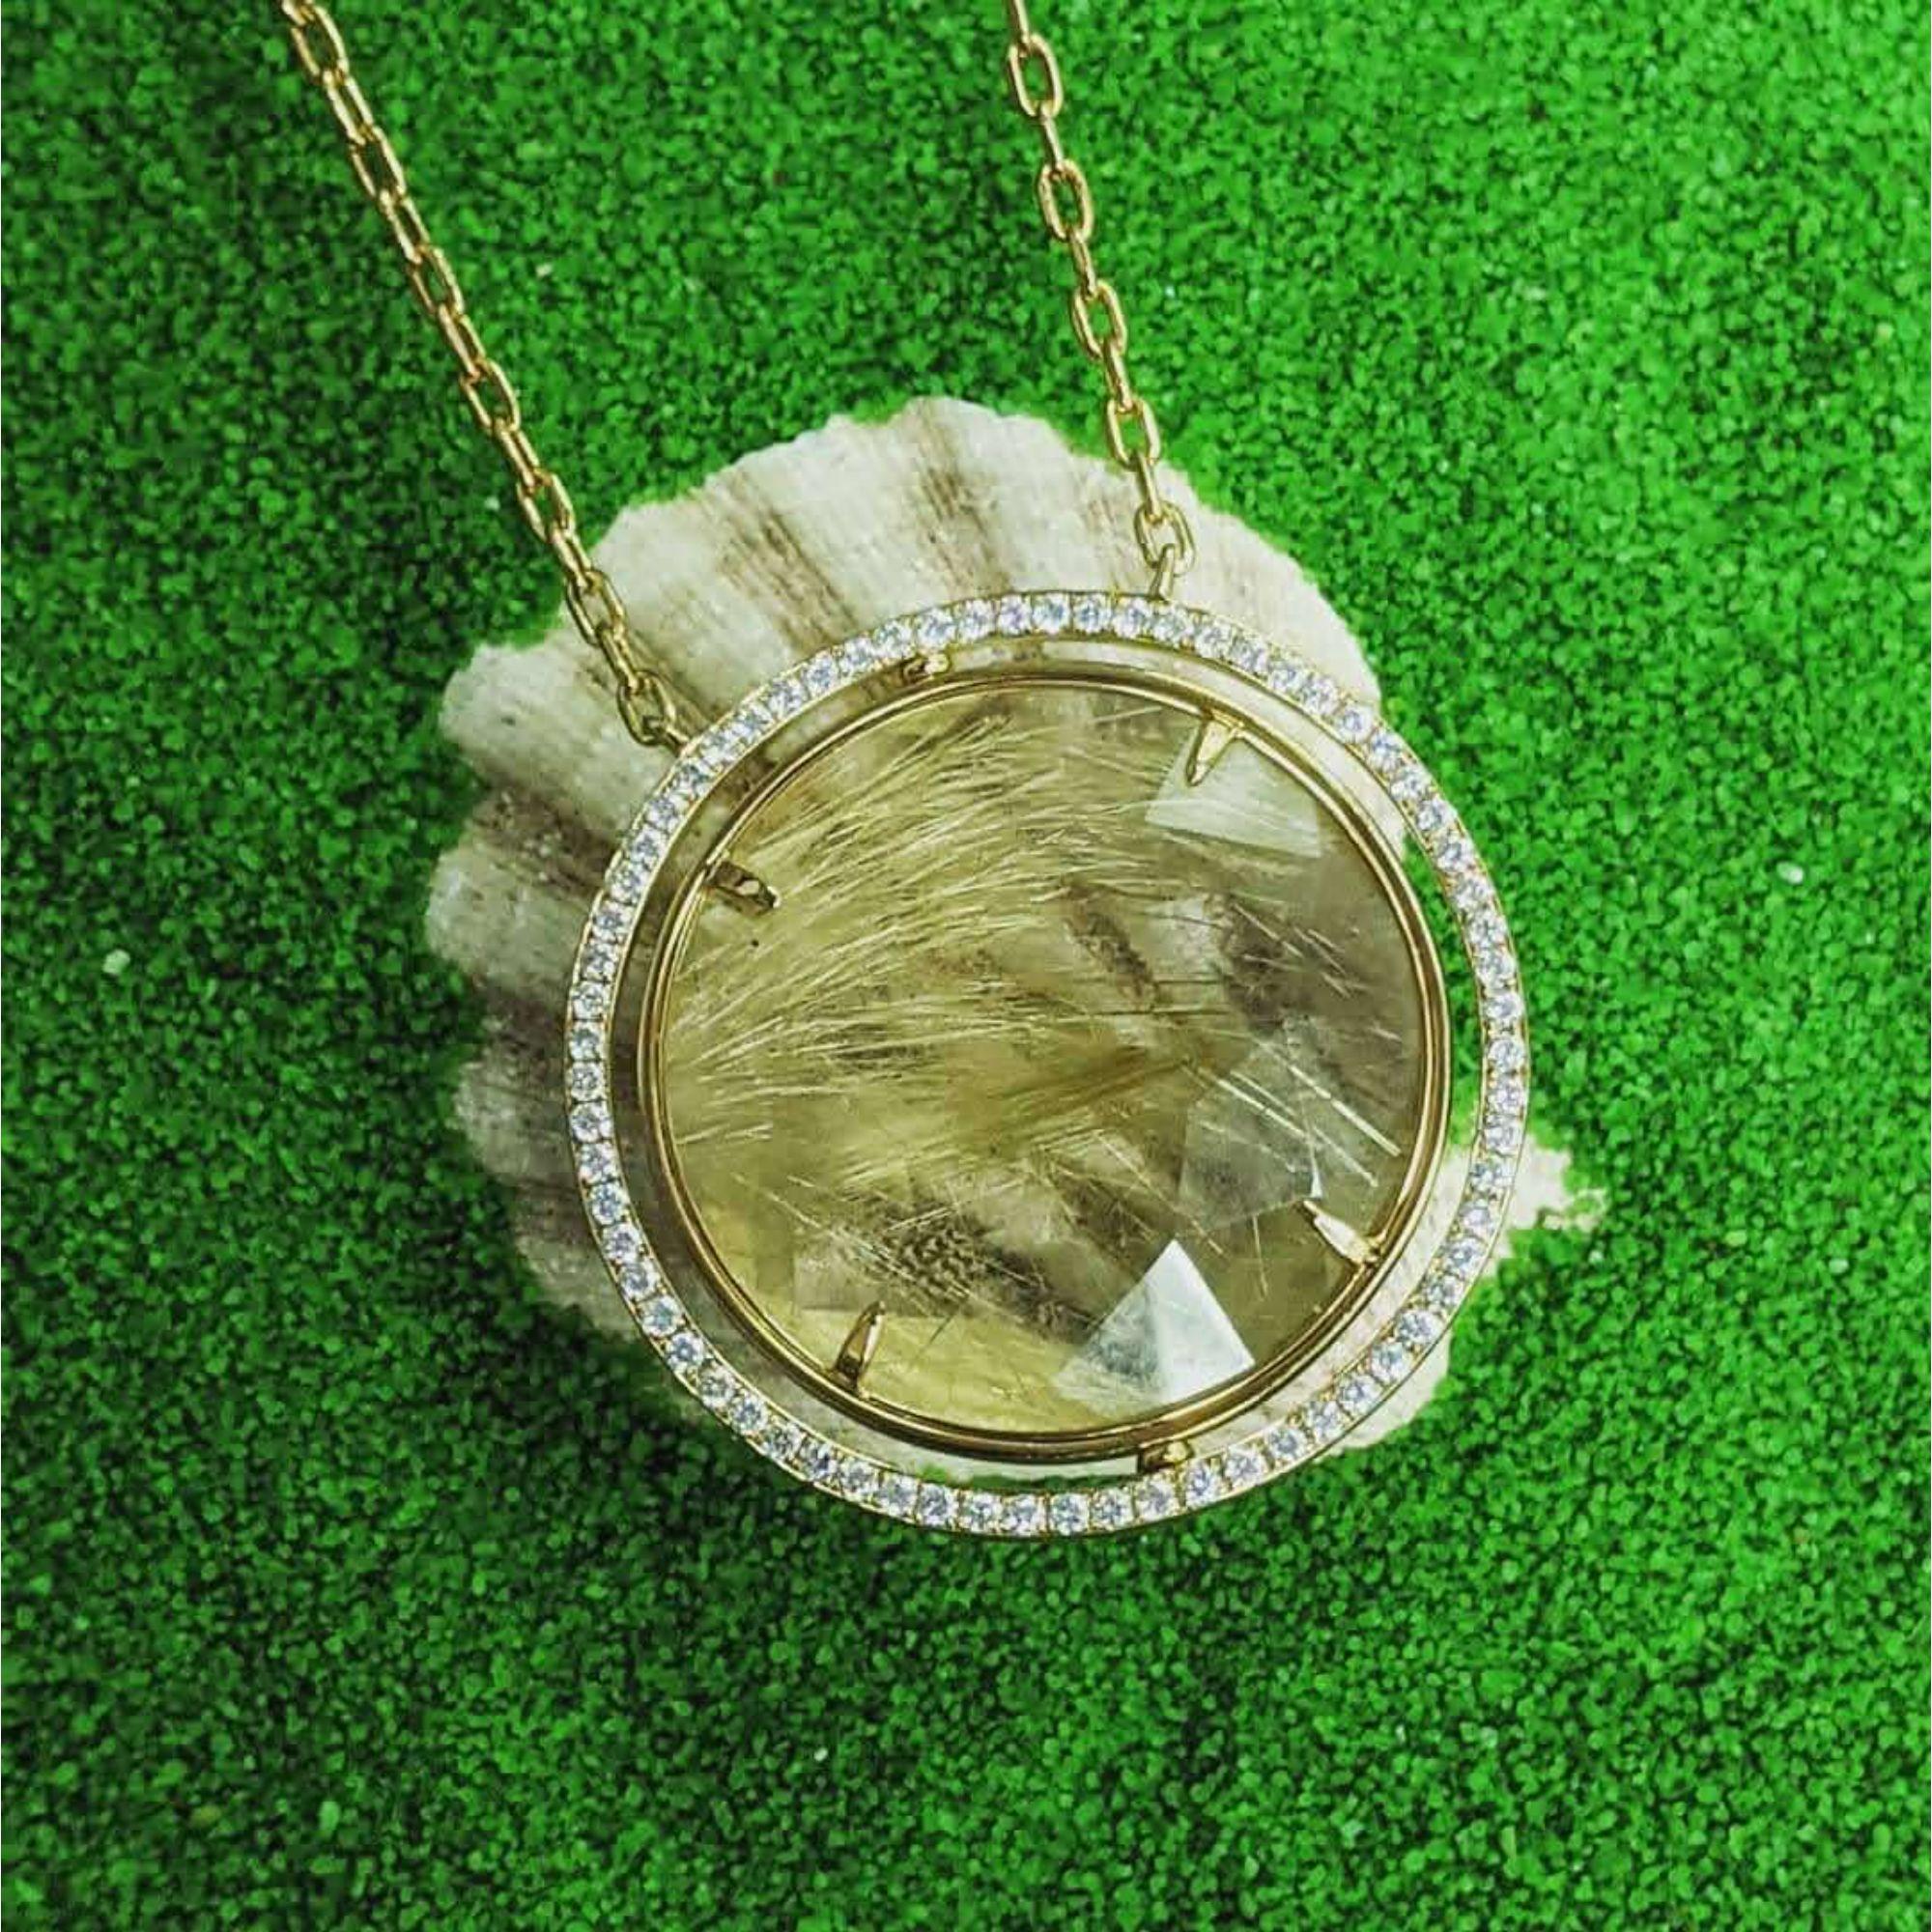 Round Rutilated Quartz Medallion Pendant With Chain, Diamond 1.05 Ct, Rutilated Quartz 46.48 Ct, Approximately 38.5 mm diameter

Available in other metal/ gemstone options: These Gemstone pieces can be made in white, pink, yellow gold or two-tone.